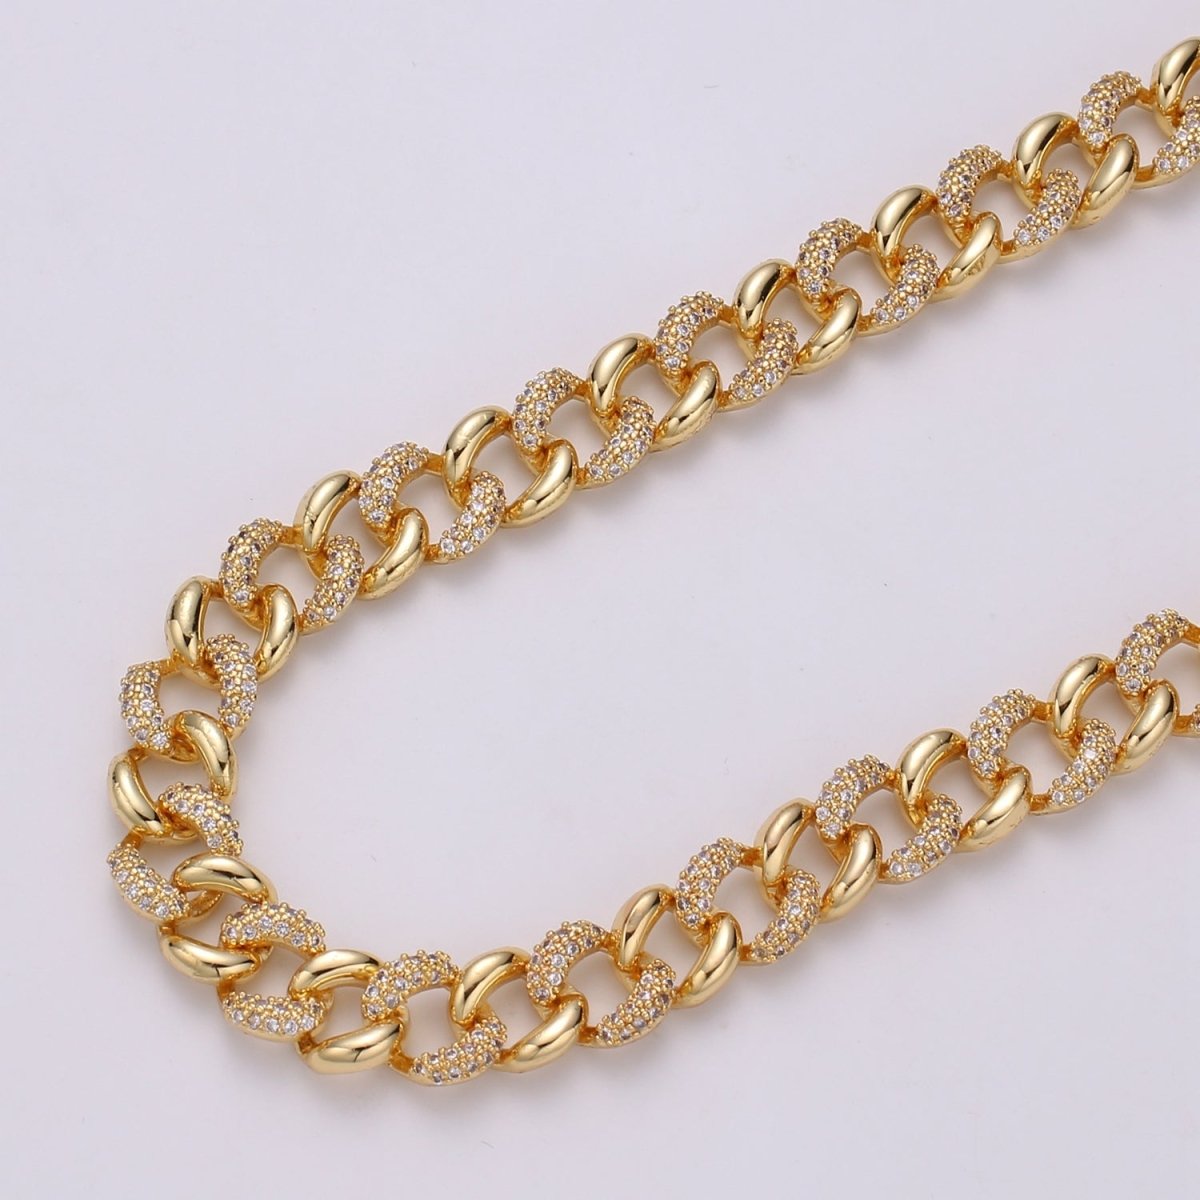 24K Gold Filled Cluster CZ CURB Chain by Yard, Fancy Roll Chain For DIY Craft, Necklace Bracelet Anklet Component Supply | ROLL-326 (O-072) Clearance Pricing - DLUXCA